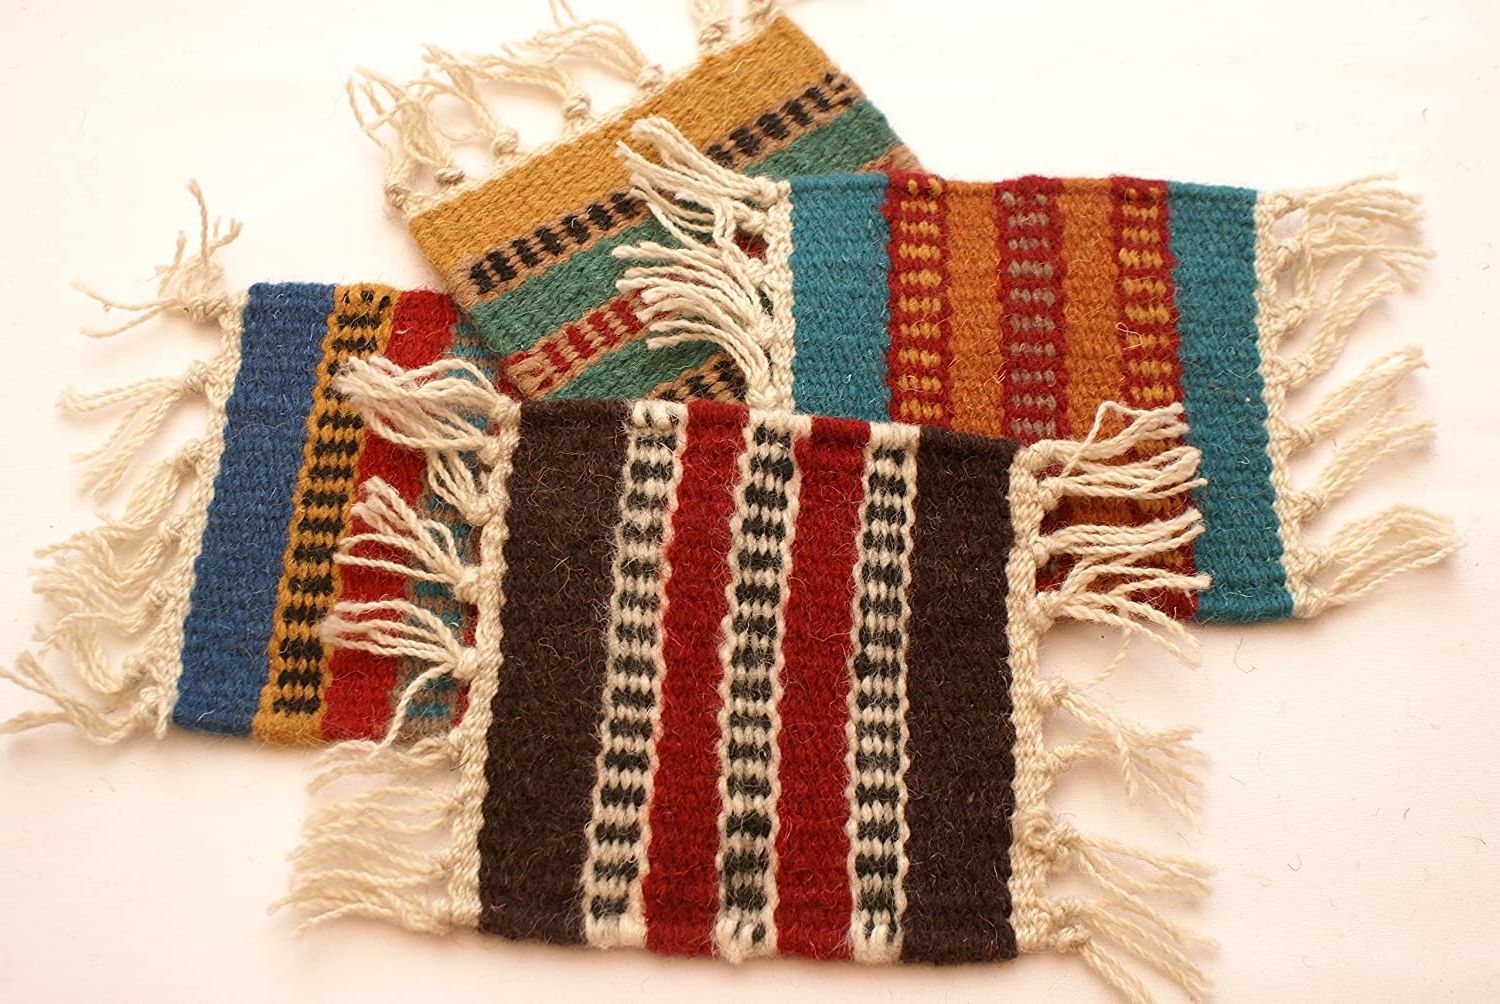 Preferred Blended Fabric Fringed Design Woven With Rod For Buy Southwest Wool Woven Coaster Set Of 4 Handwoven  (View 14 of 20)